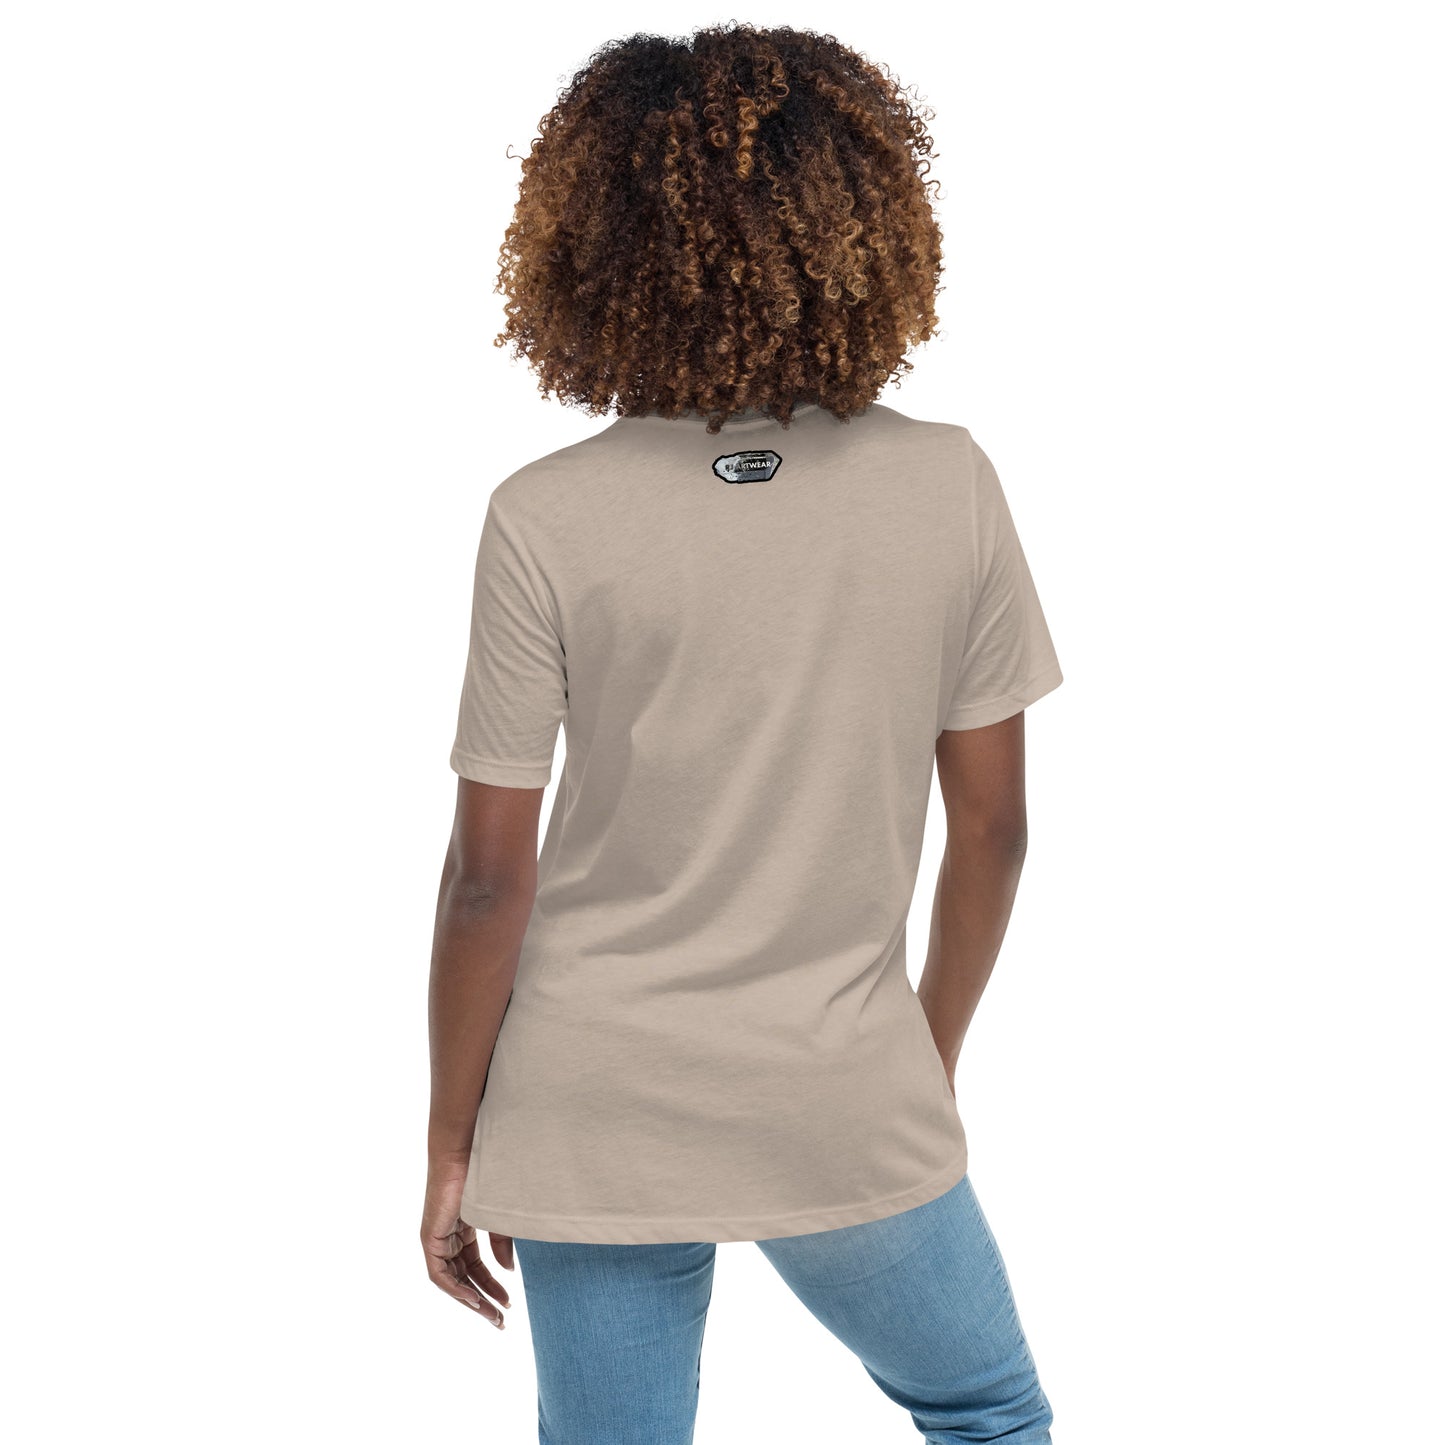 Illinois Fluorite Drawing - Women's Relaxed T-Shirt